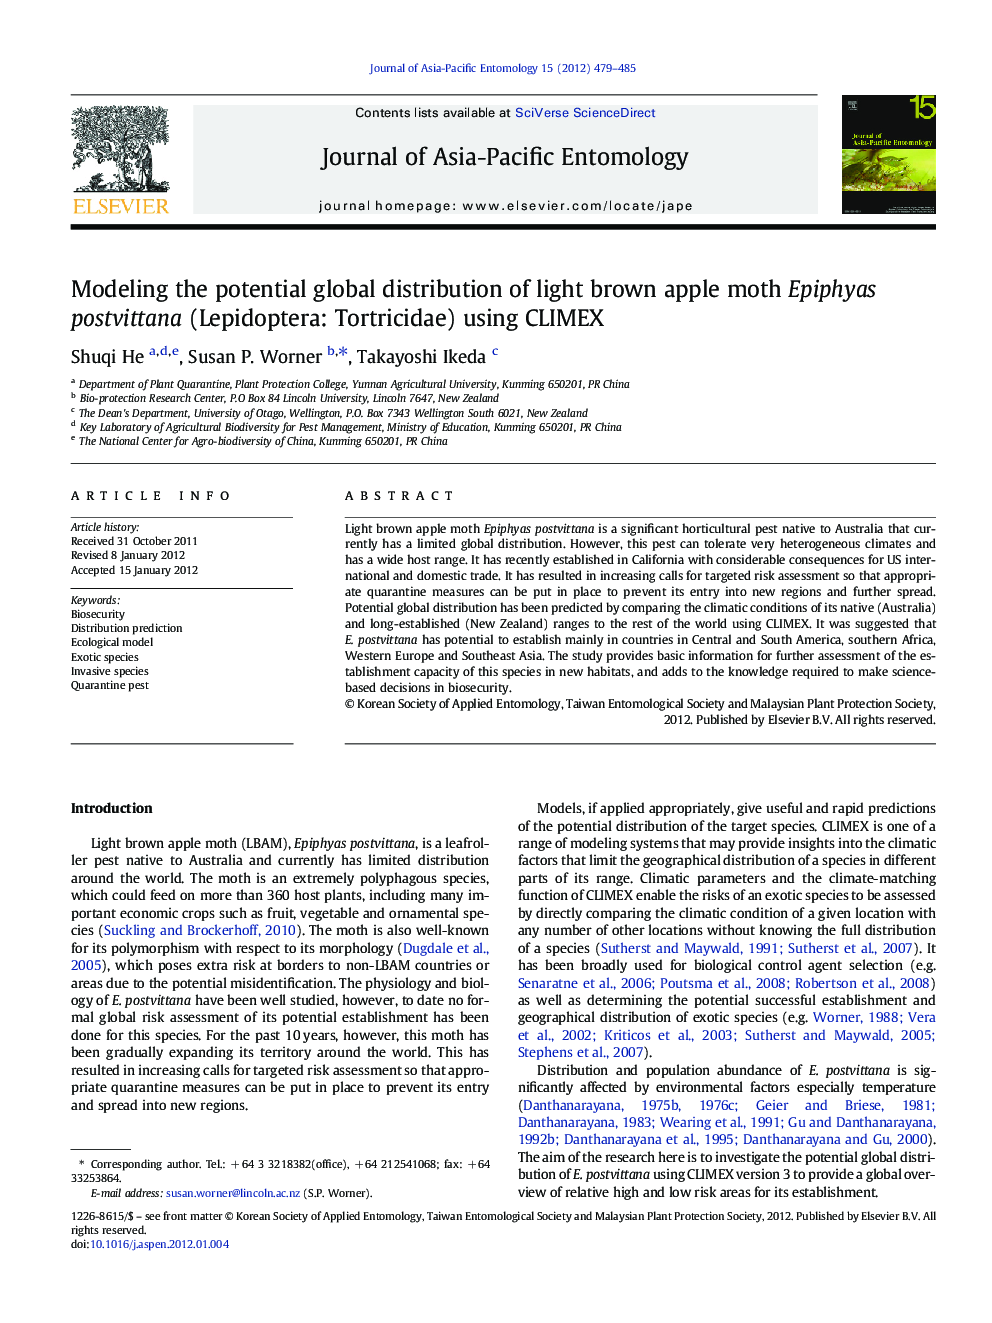 Modeling the potential global distribution of light brown apple moth Epiphyas postvittana (Lepidoptera: Tortricidae) using CLIMEX